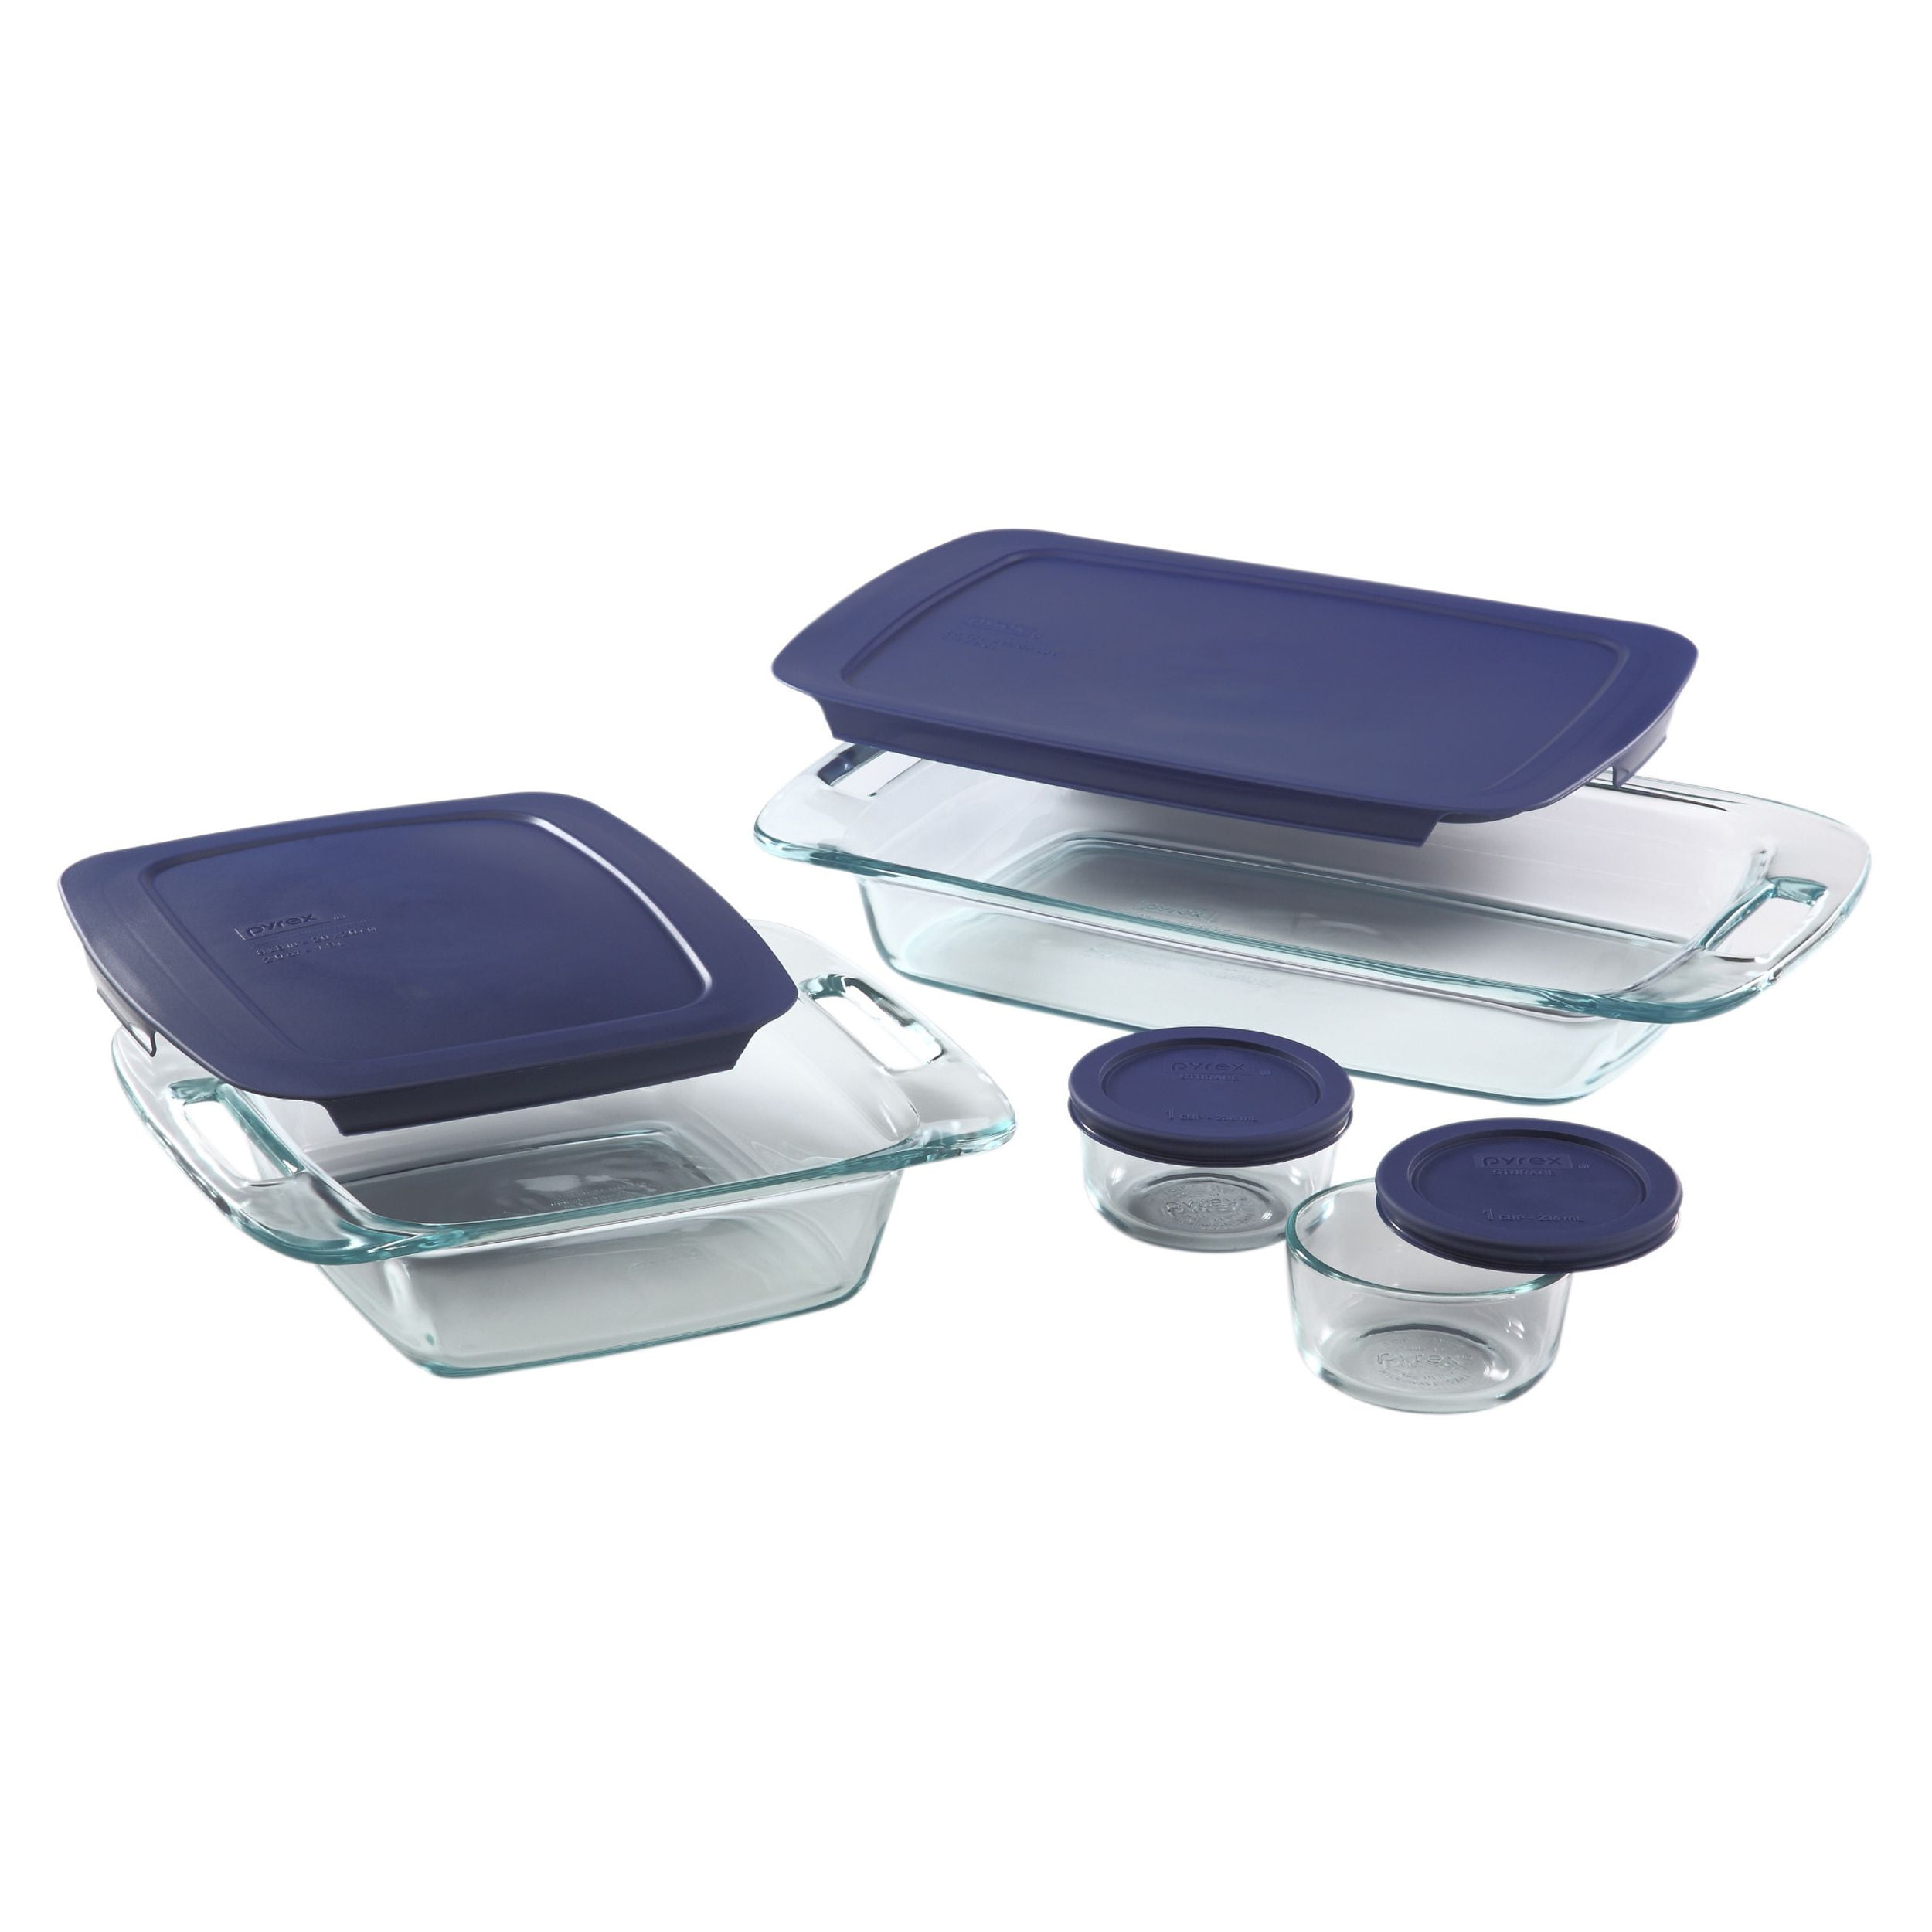 Pyrex Harry Potter 8-piece Prep and Store Set with Plastic Lids